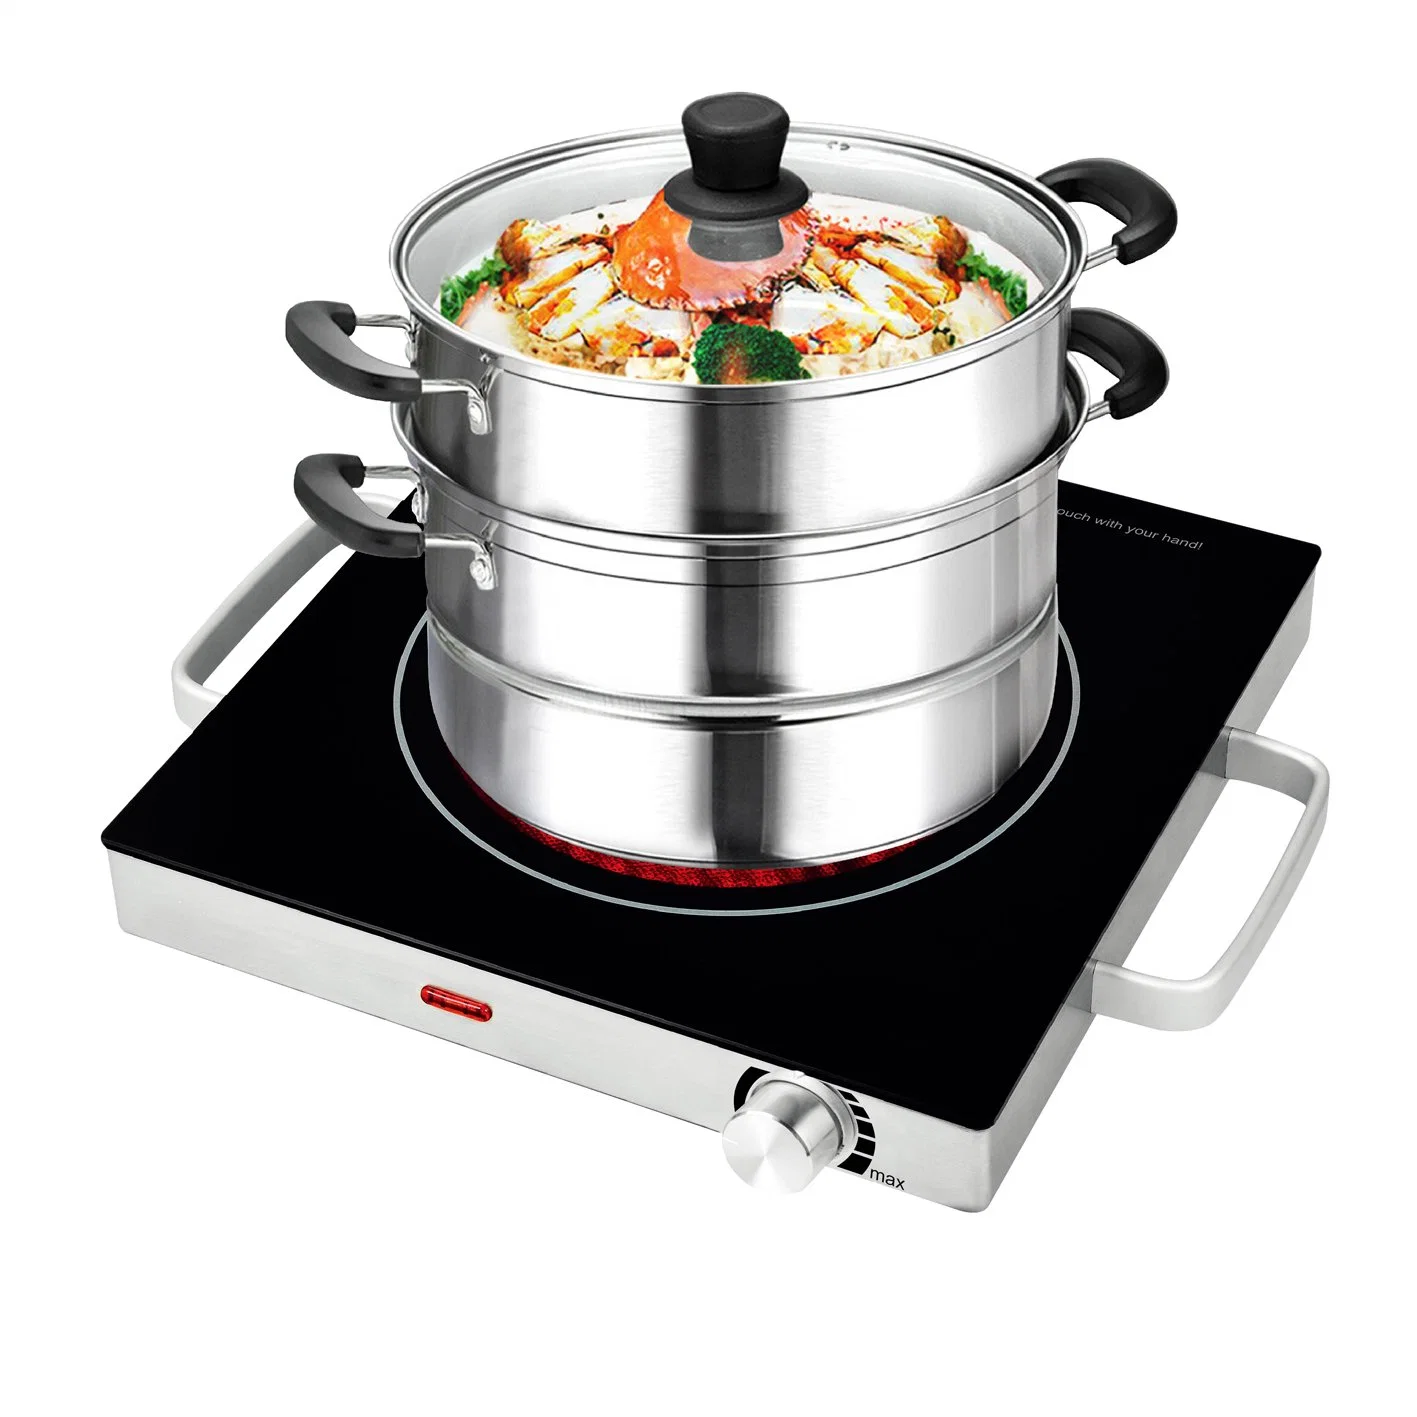 Stainless Steel Infrared Ceramic Cooker Electric 2000W Infrared Cooker for Home